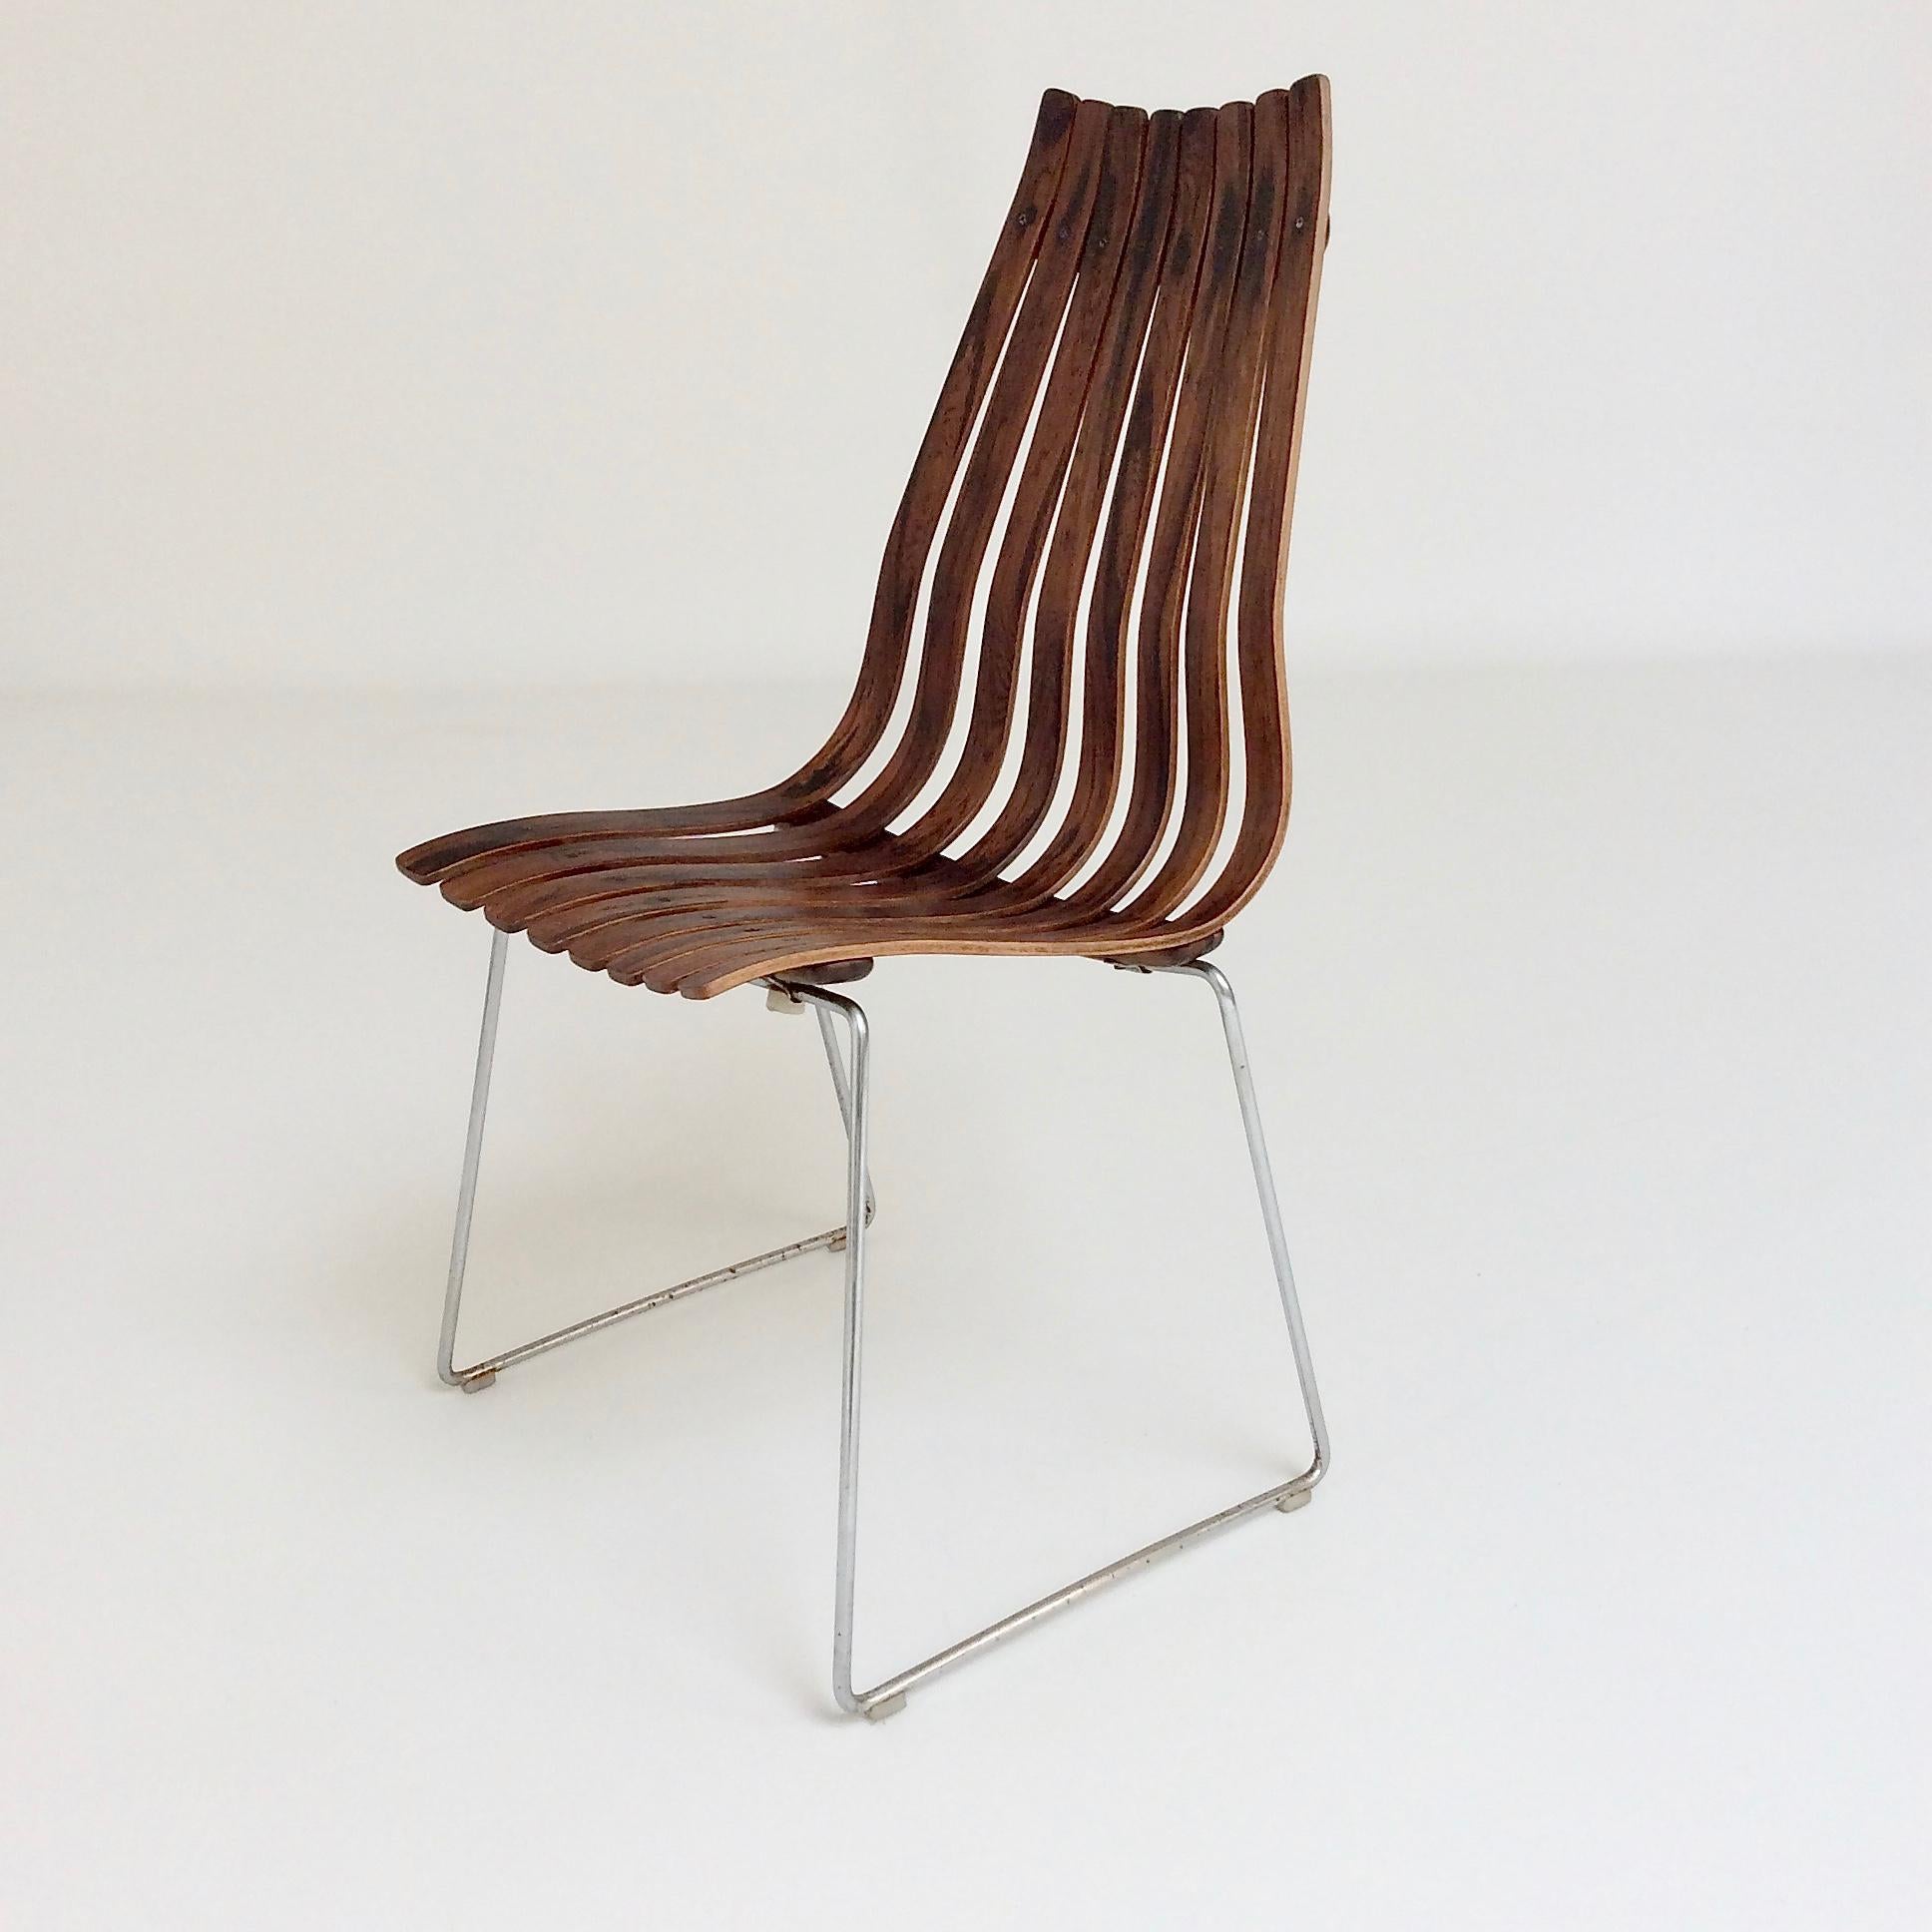 Hans Barttrud Scandia high back chair, circa 1956, Norway.
Bent rosewood slats, tubular chromed steel base.
Dimensions: 95 cm H, 56 cm W, 56 cm D, seat height 46 cm.
All purchases are covered by our Buyer Protection Guarantee.
This item can be